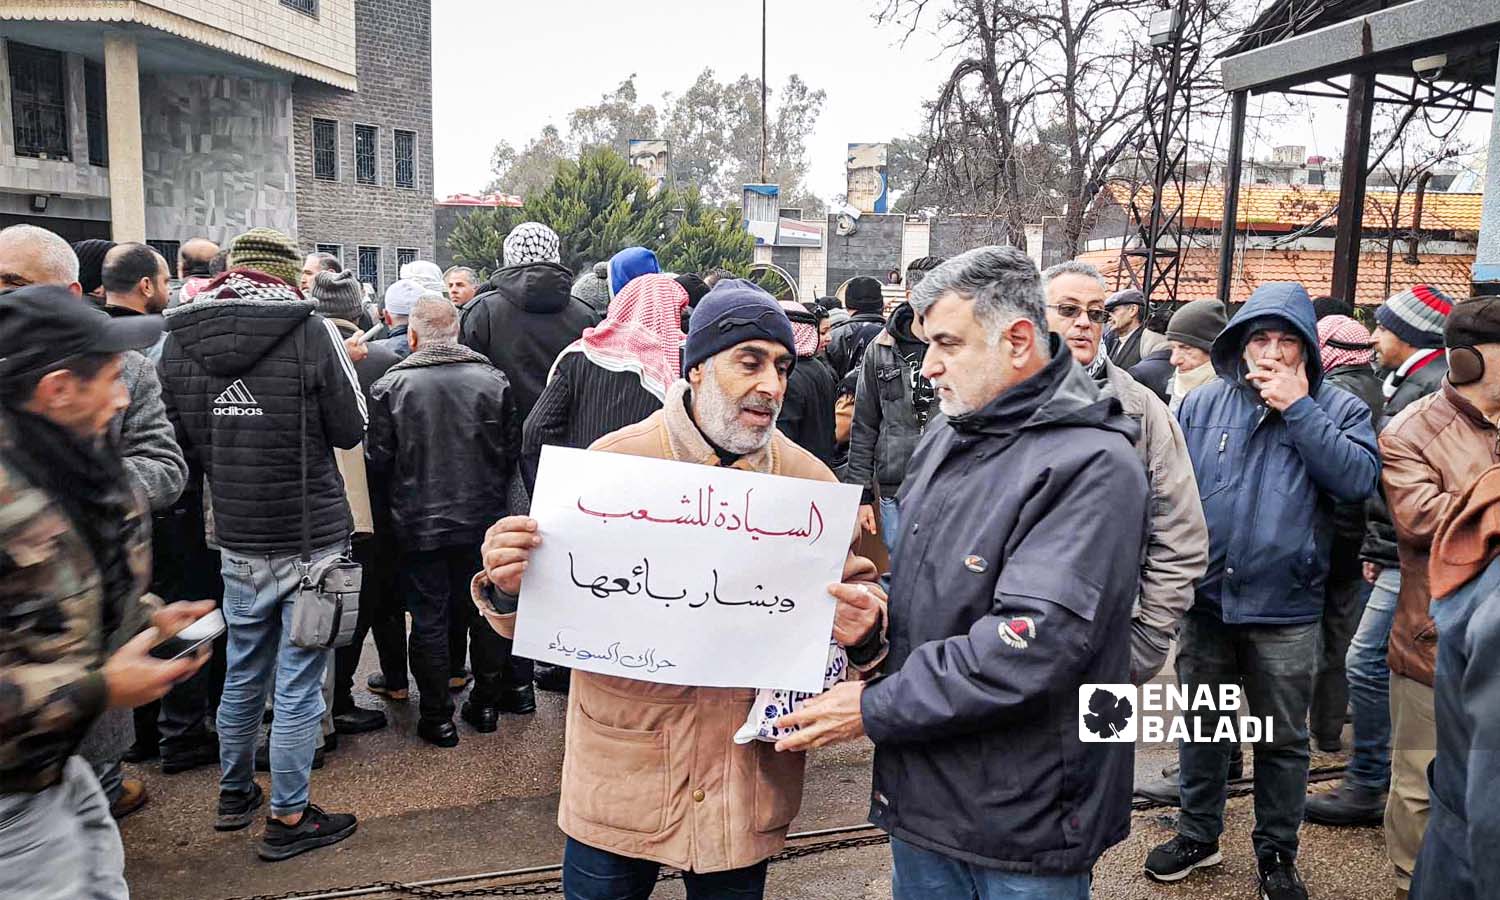 Protesters stand in front of the Water Establishment in As-Suwayda, demanding political change in Syria - February 19, 2024 (Enab Baladi)
